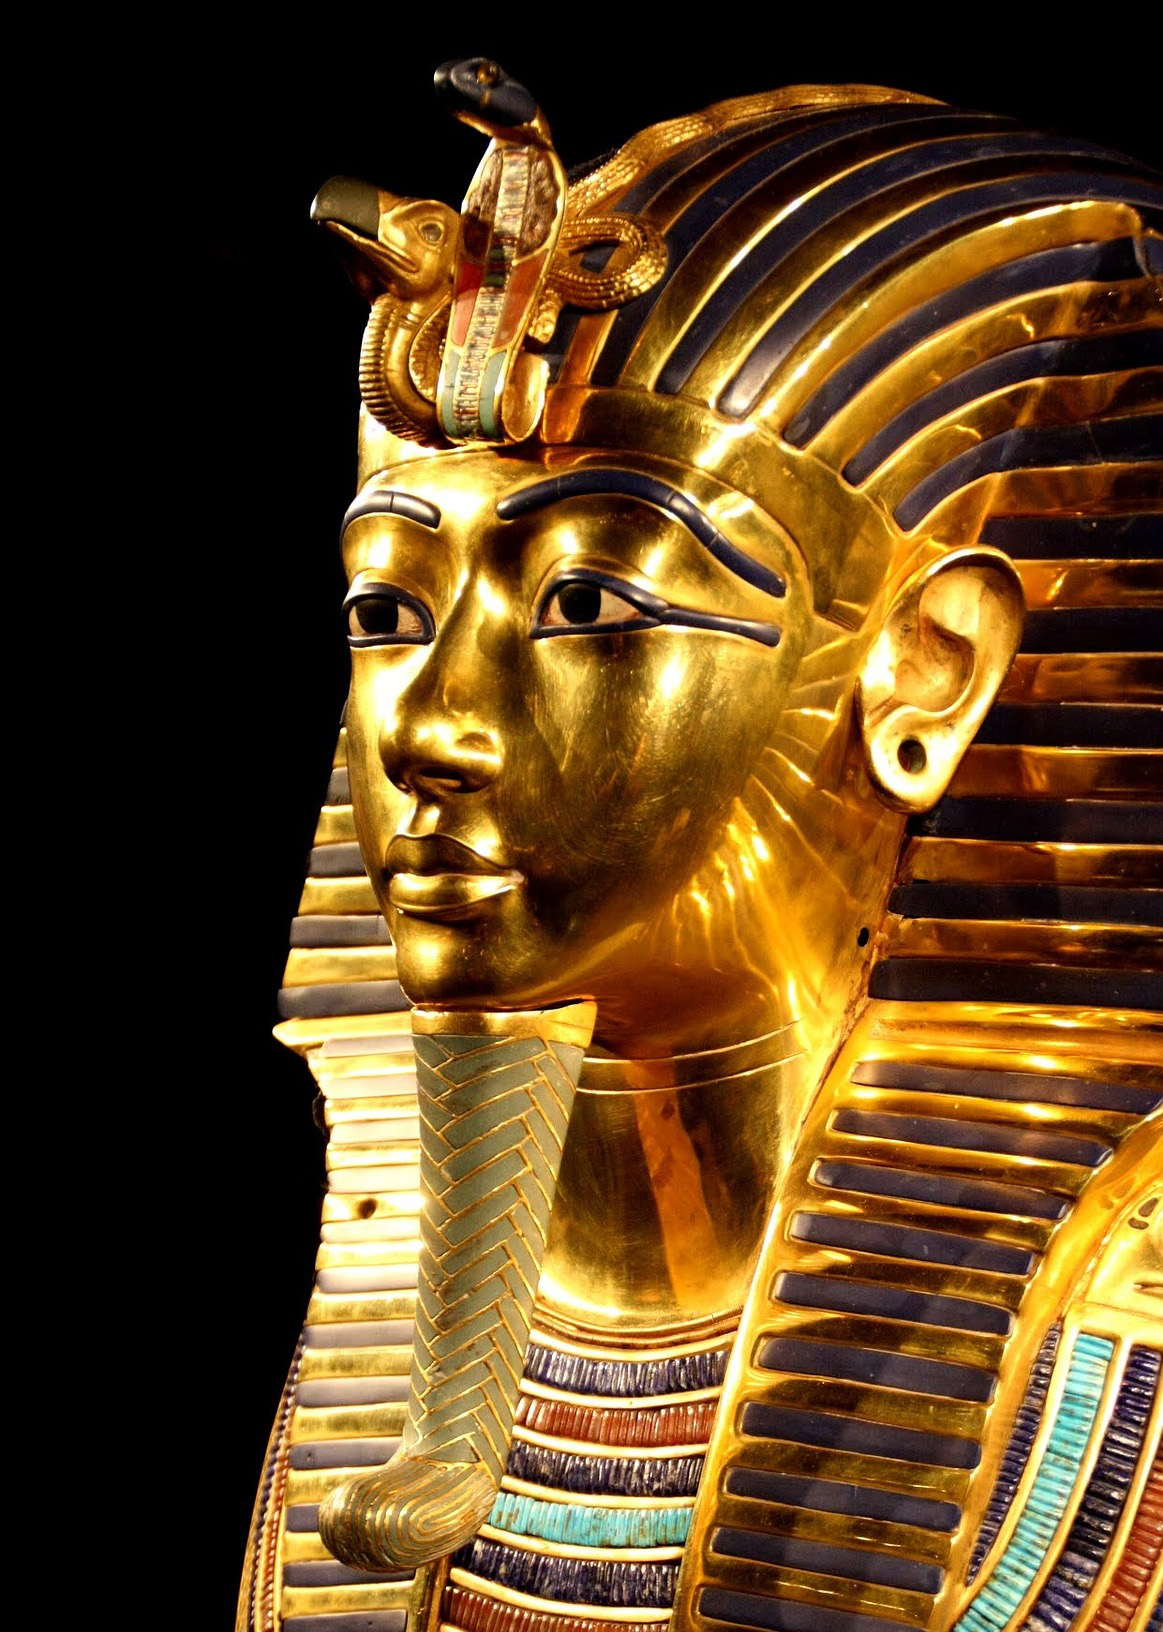 Tutankhamuns Golden burial mask - one of the must sees in Cairo, Egypt